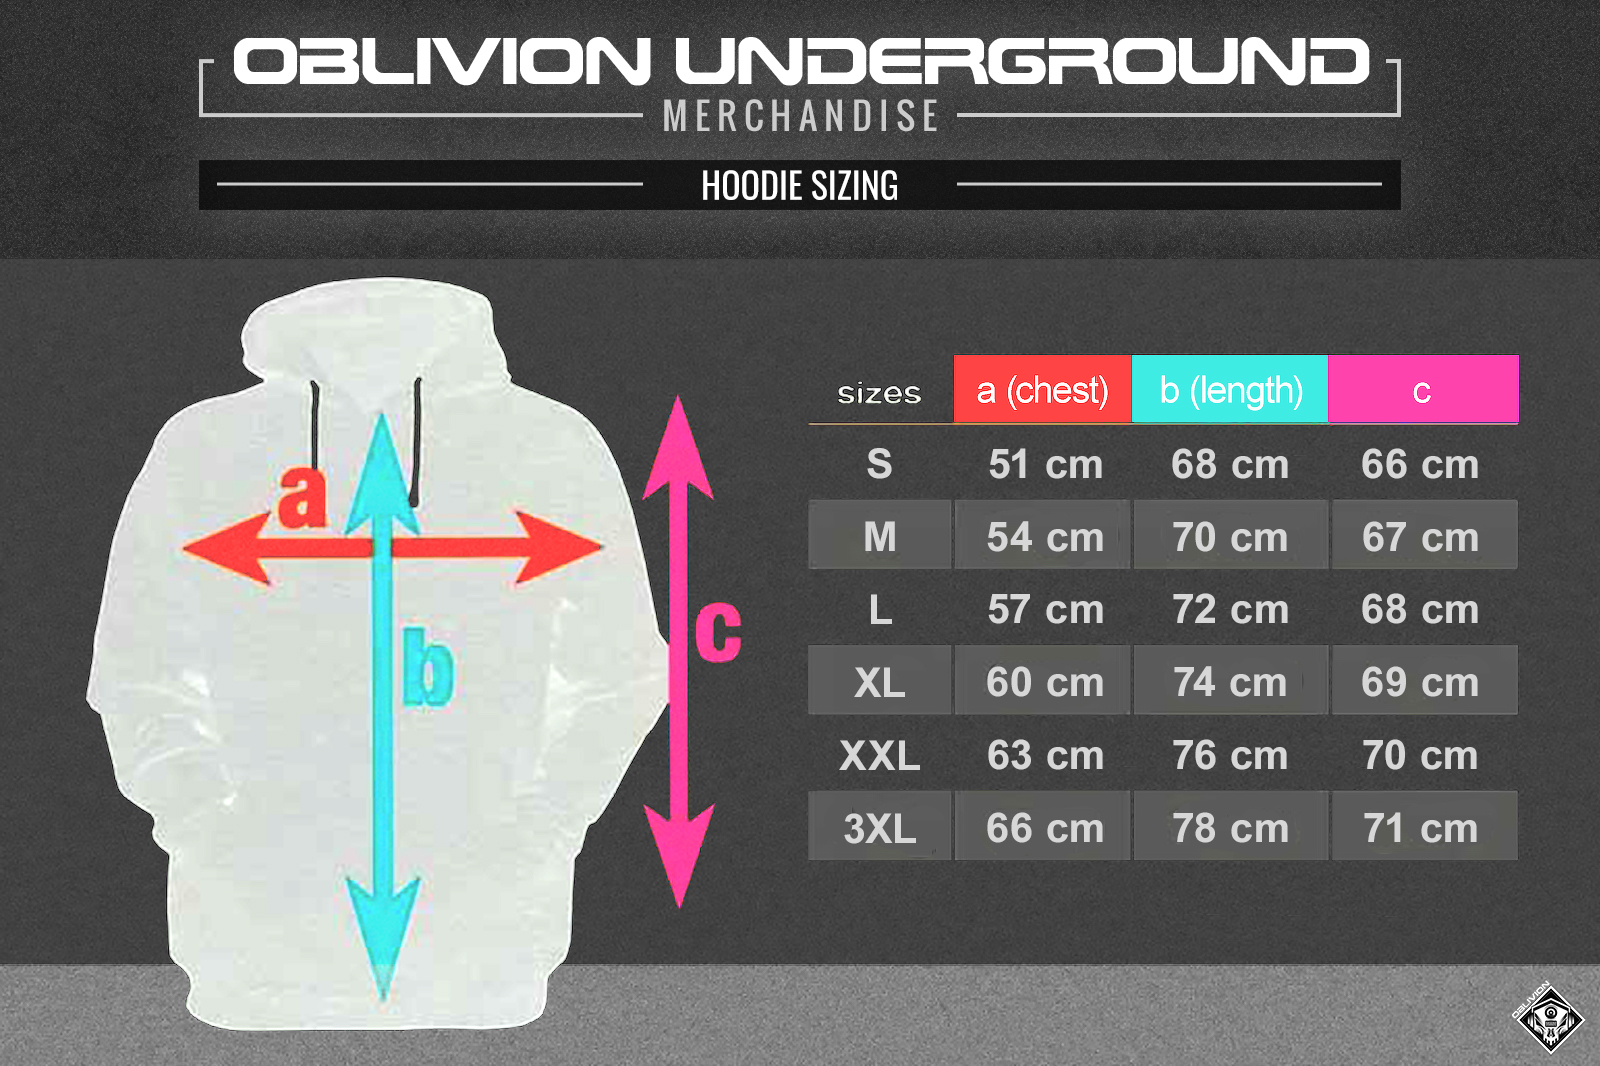 HOODIE SIZES CHART - Oblivion Underground Merch - Electronic Music Record Label - Recordings & Events - oblivion-underground.com